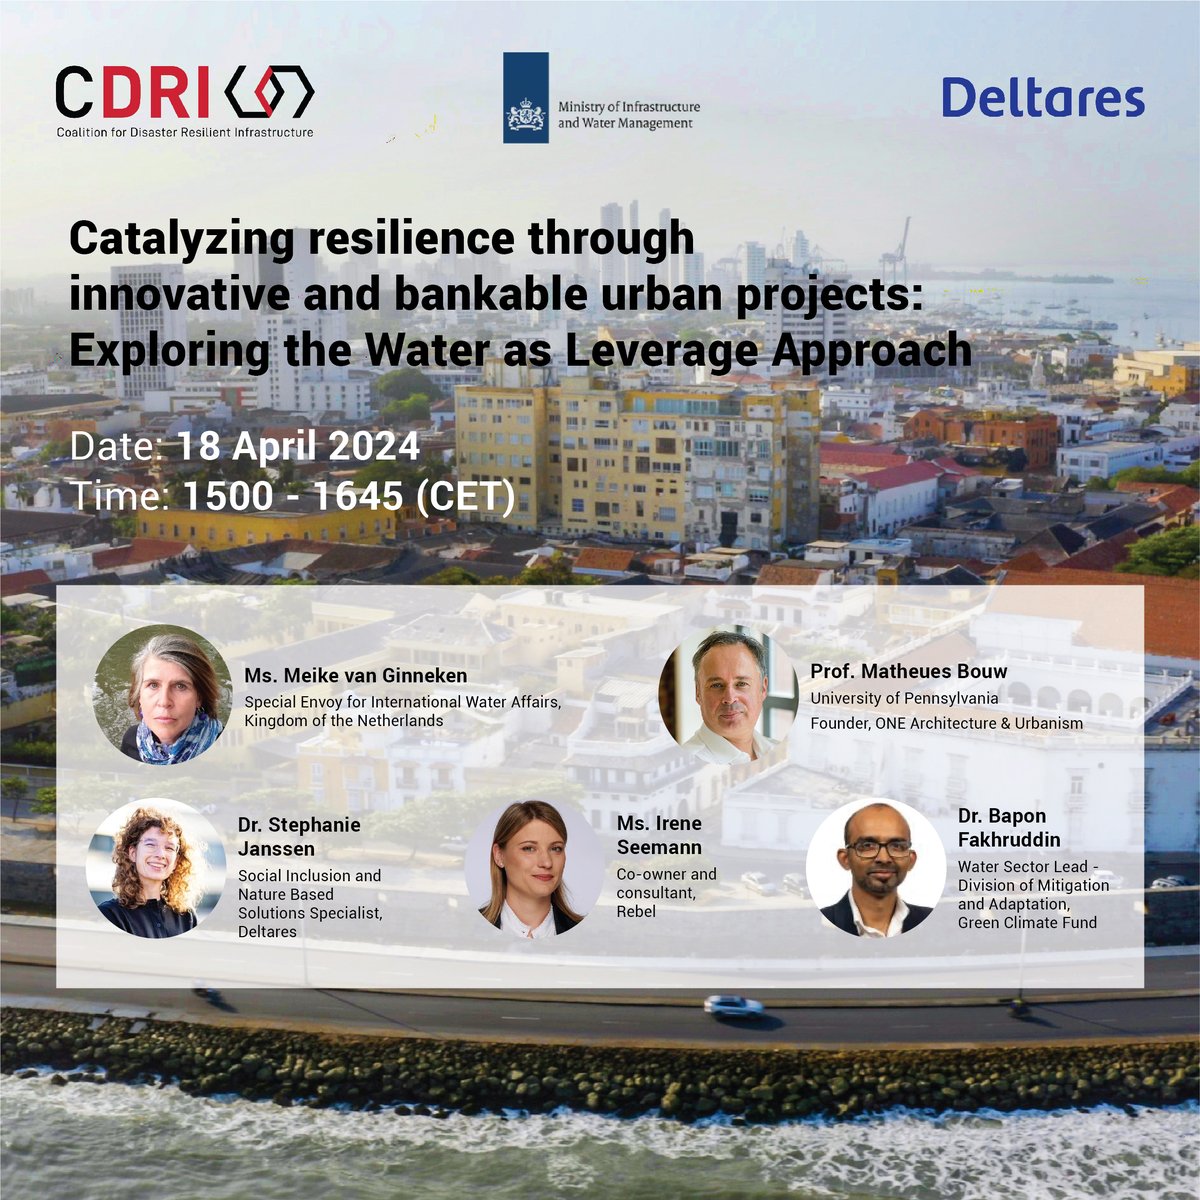 CDRI is organizing a #Masterclass for urban water professionals focusing on mobilizing finance within the framework of @WaterasLeverage methodology which enhances urban water #resilience. Register here: driconnect.cdri.world/all-events/mas…